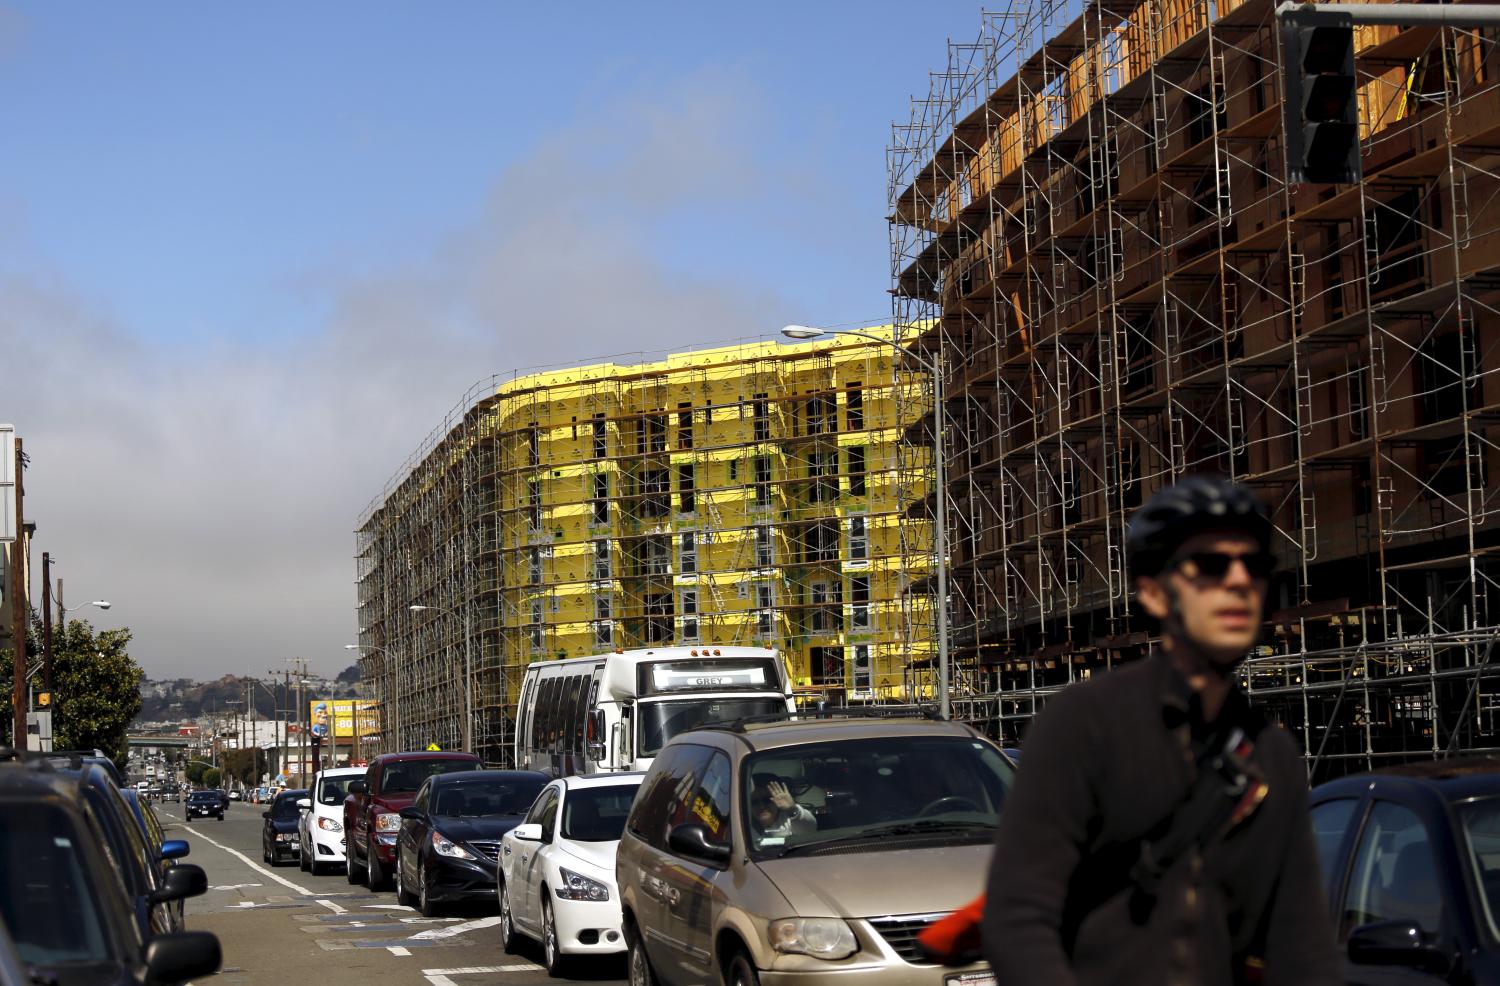 A bicyclist sits in traffic near a housing construction project in San Francisco, California June 2, 2015. The median rent for an apartment in the city is now $4,225 per month, according to local media. REUTERS/Robert Galbraith